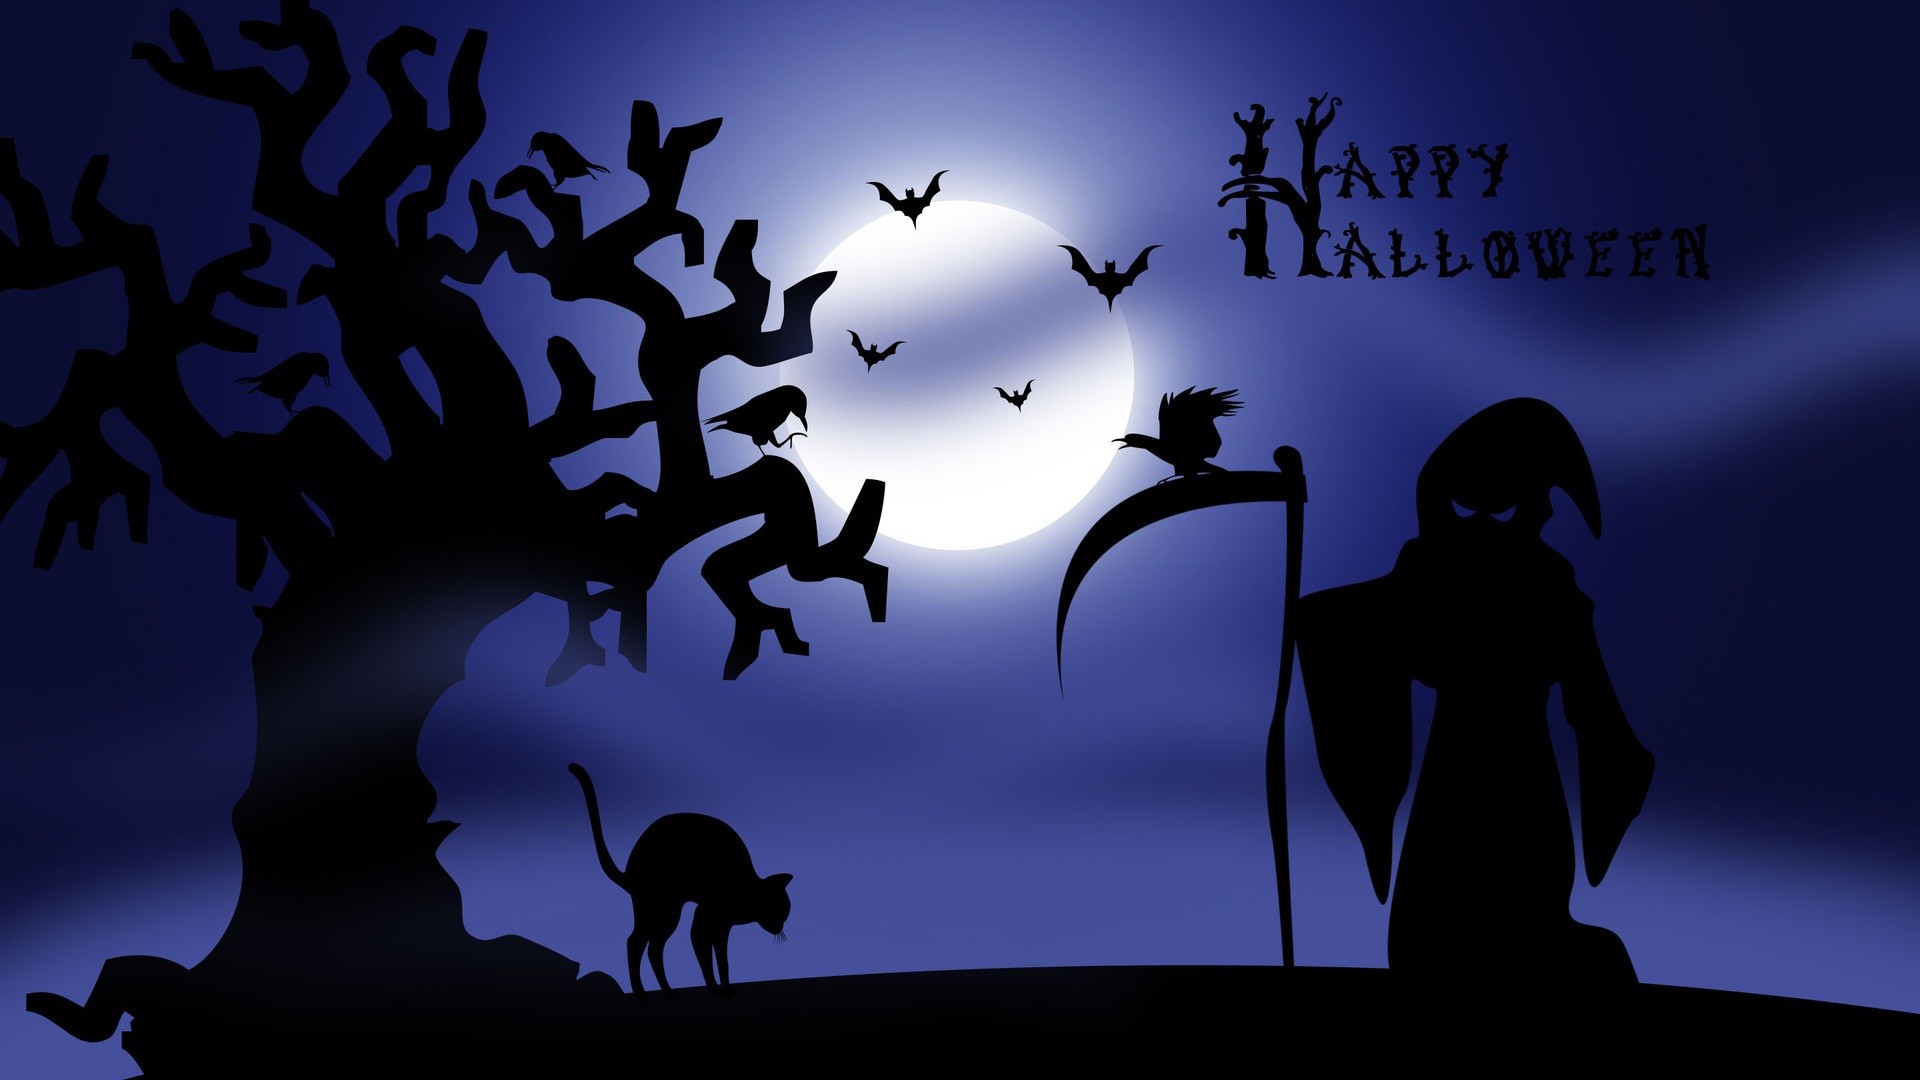 1920x1080 60+ Happy Halloween Images, Pictures and Wallpapers ... 60 Happy Halloween  Images Pictures And Wallpapers